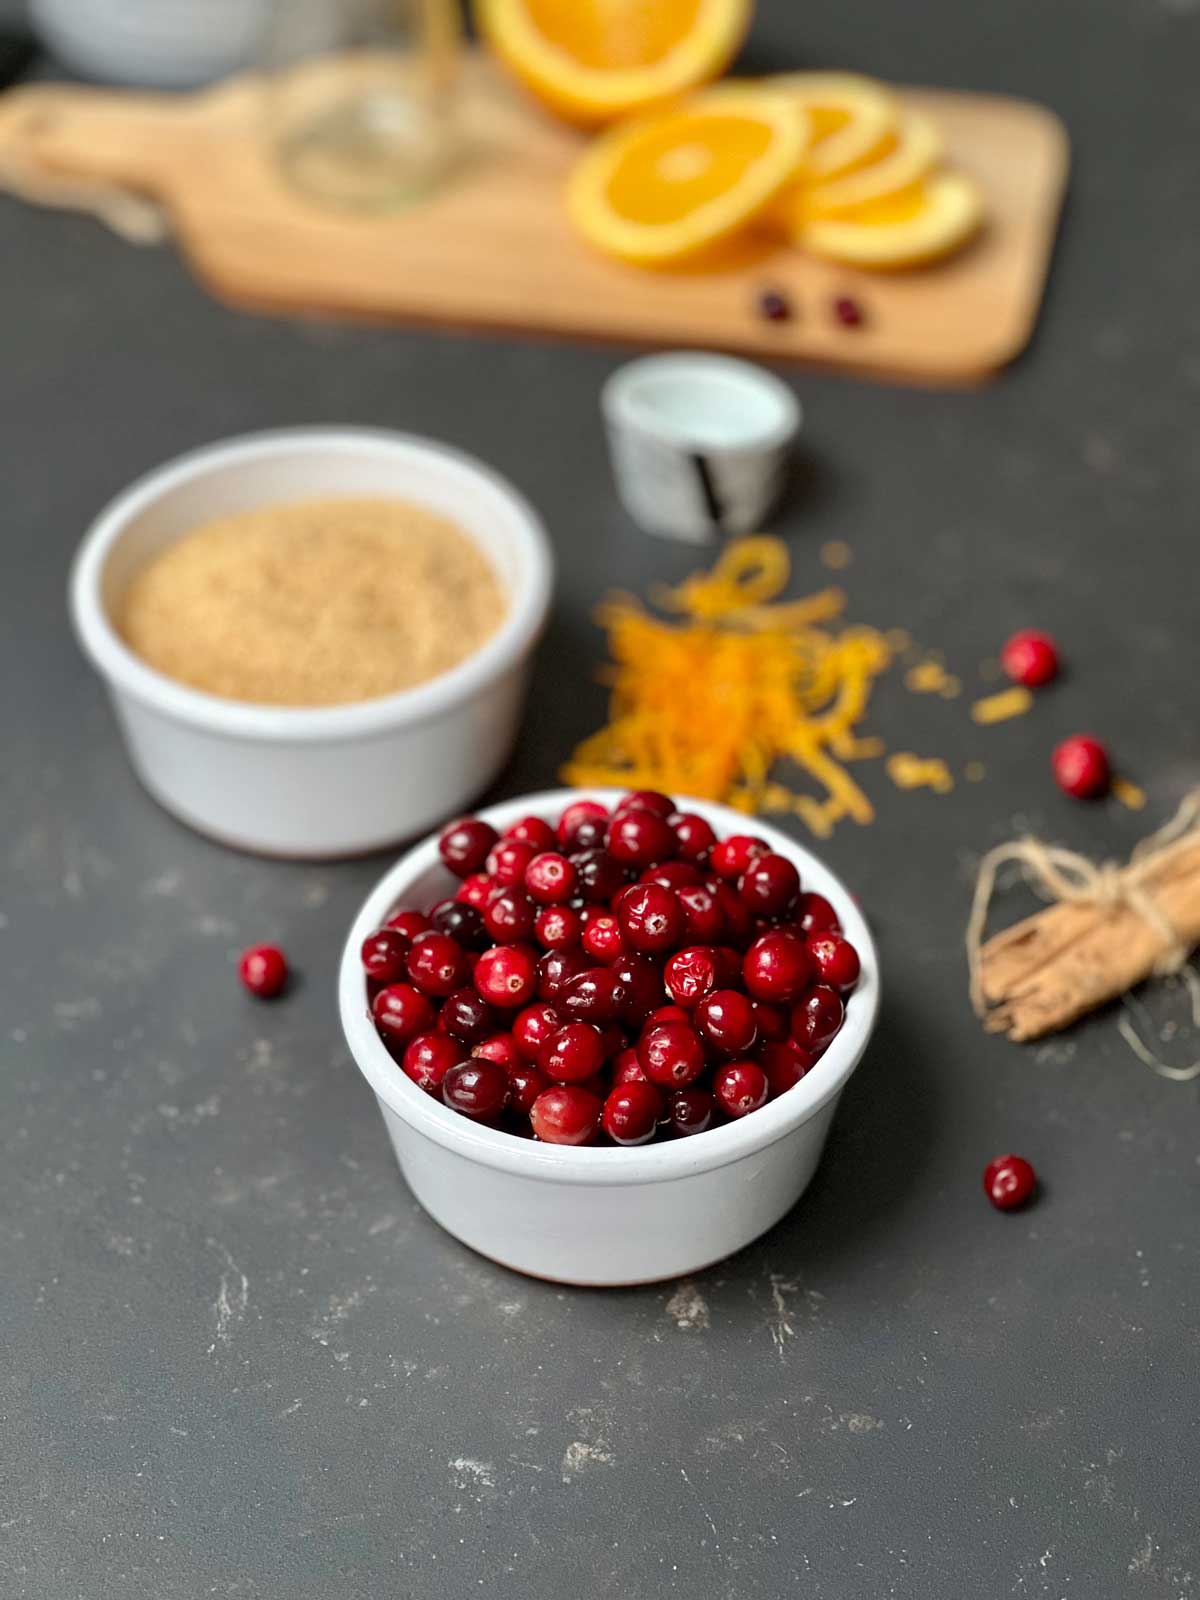 Cranberries in a white bowl and the remaining ingredients in the background.